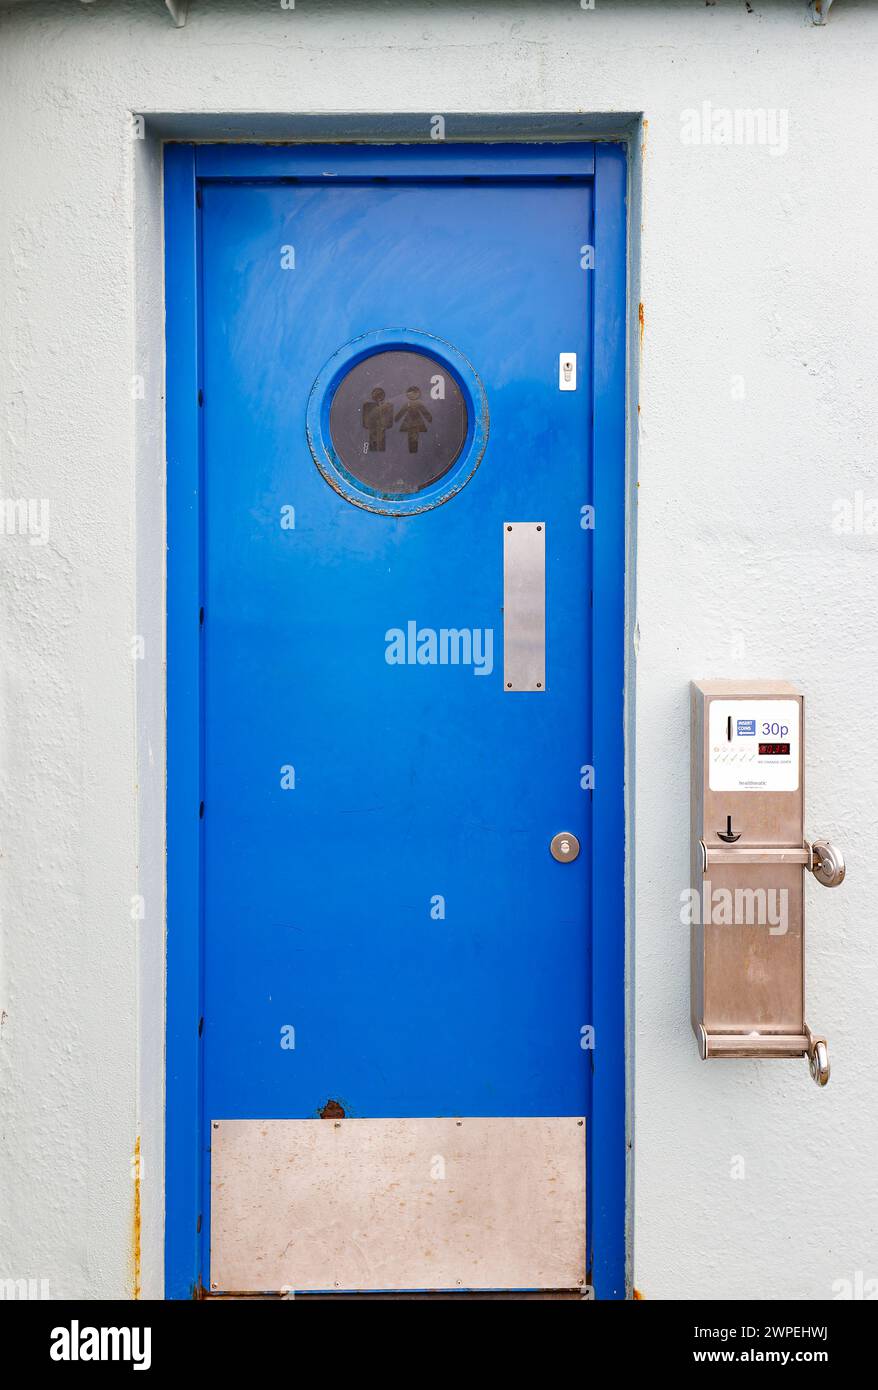 Public Toilets with minimum price of thirty pence instead of Spend a Penny in Blue with finger plate and coin machine and circular engraved window Stock Photo